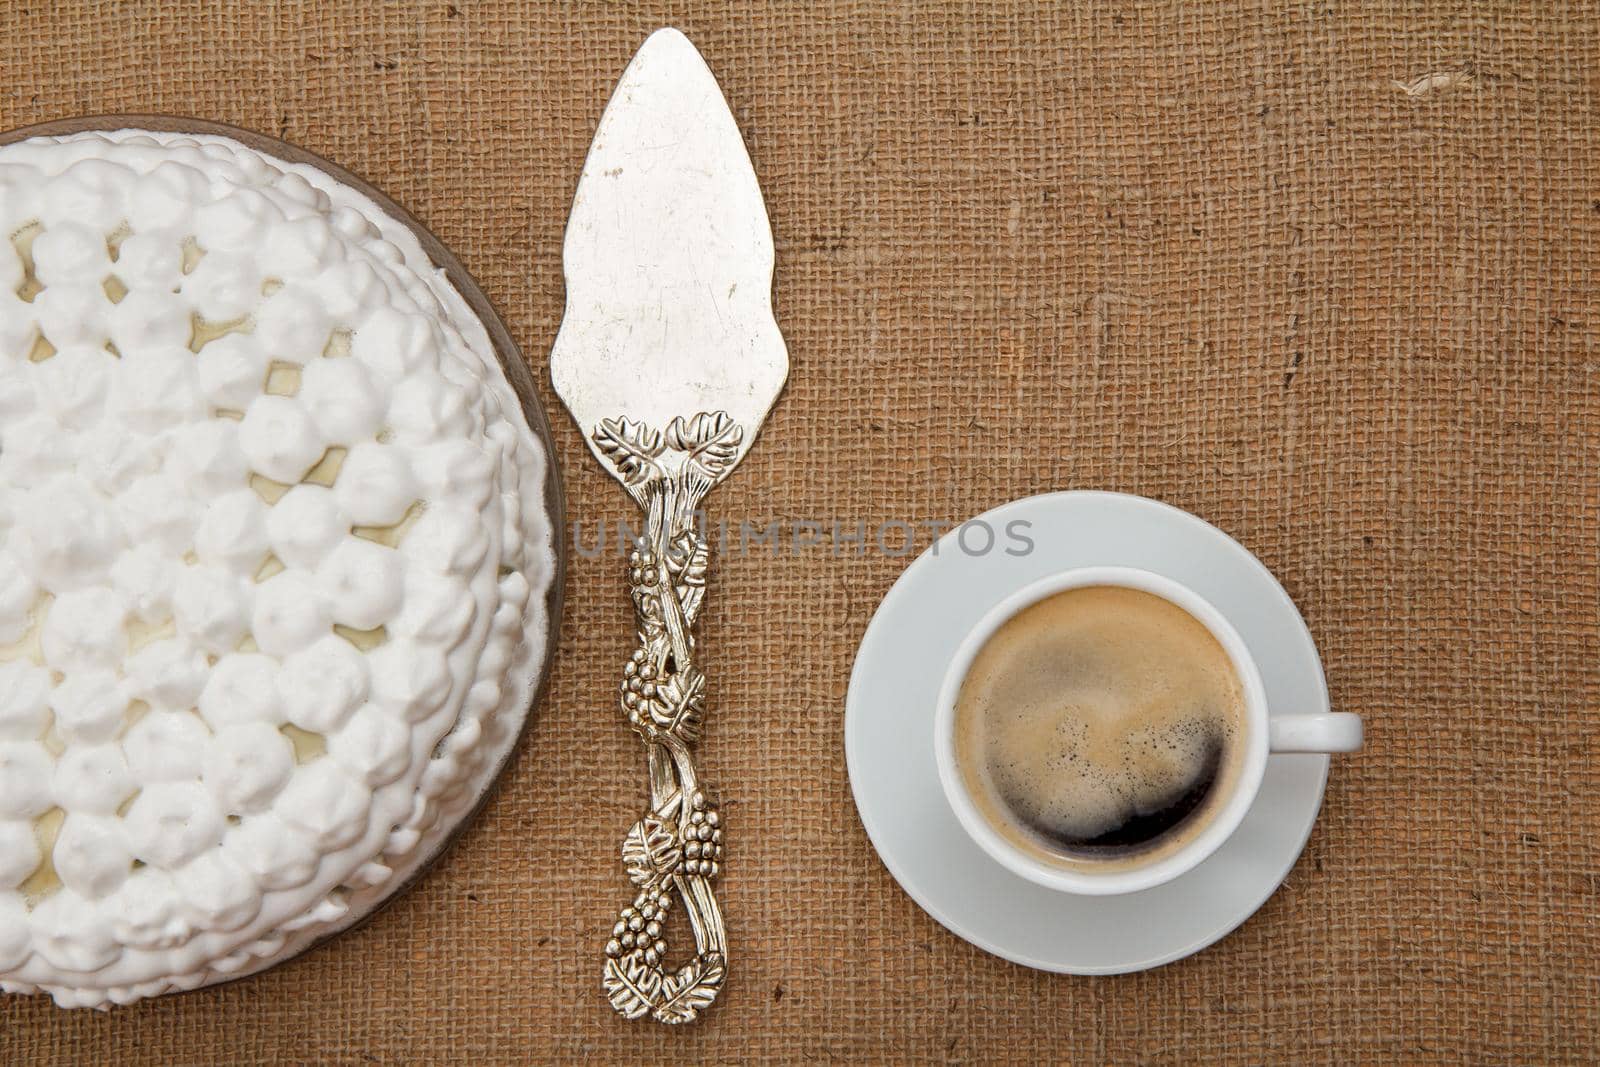 Biscuit cake decorated with whipped cream, silver cake lifter and cup of coffee on table with sackcloth. Top view